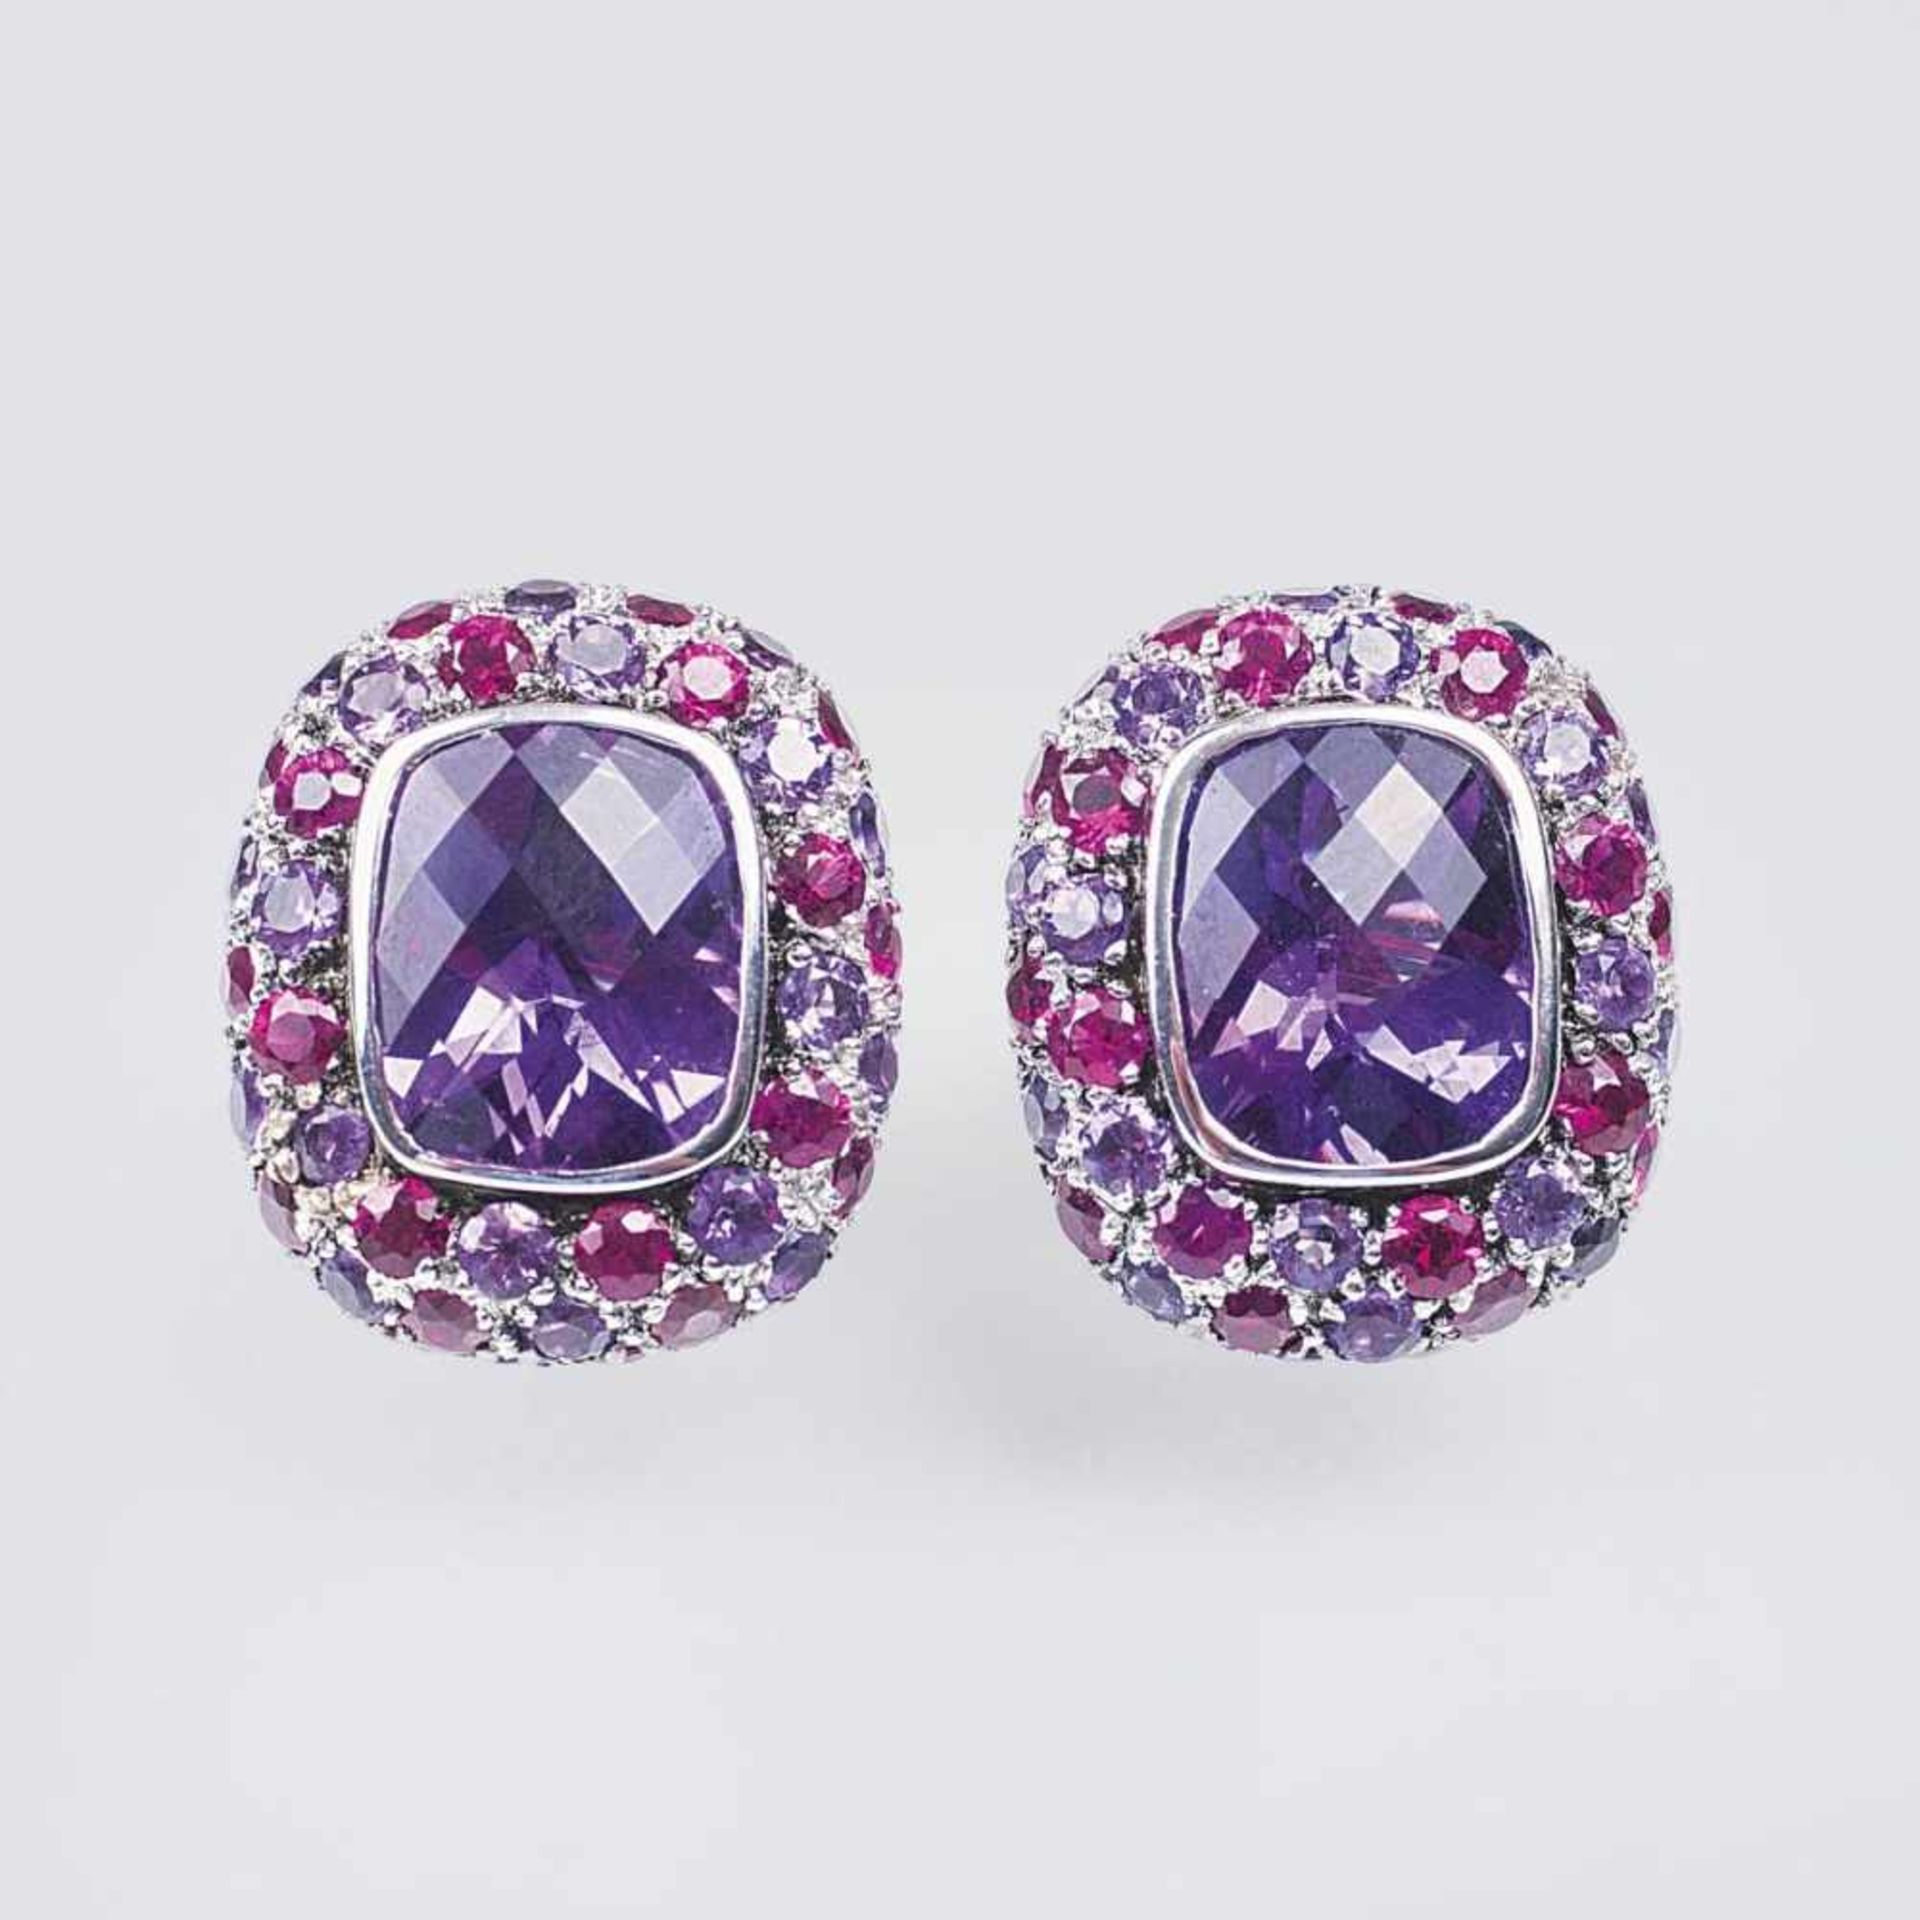 A Pair of Ruby Amethyst Earstuds18 ct. white gold. In bezel setting two cushion shaped amethysts